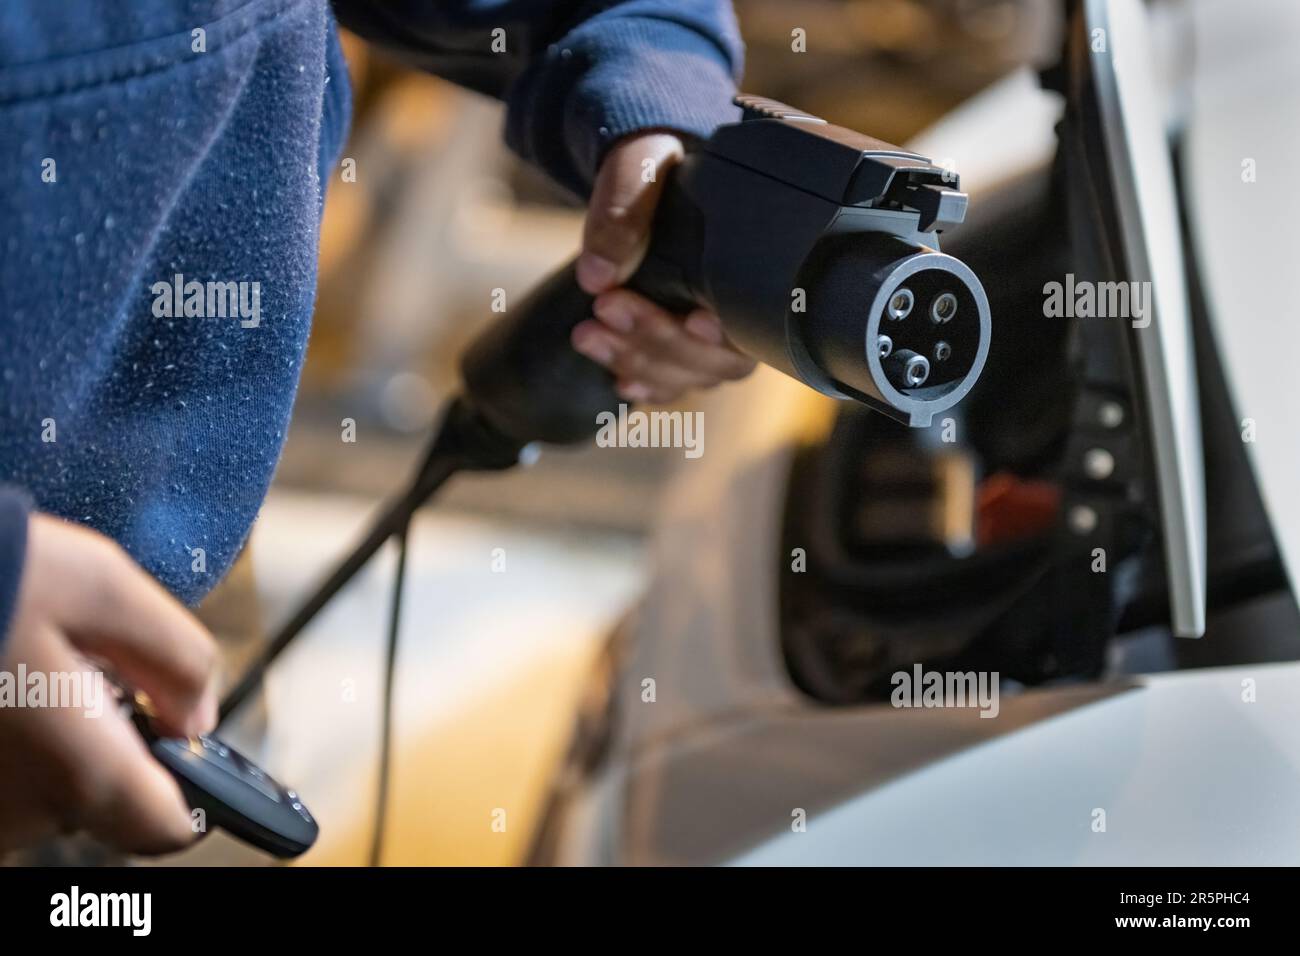 Woman hands holding electric car charger and remote controller, ready to connect to electric vehicle at home garage. Stock Photo